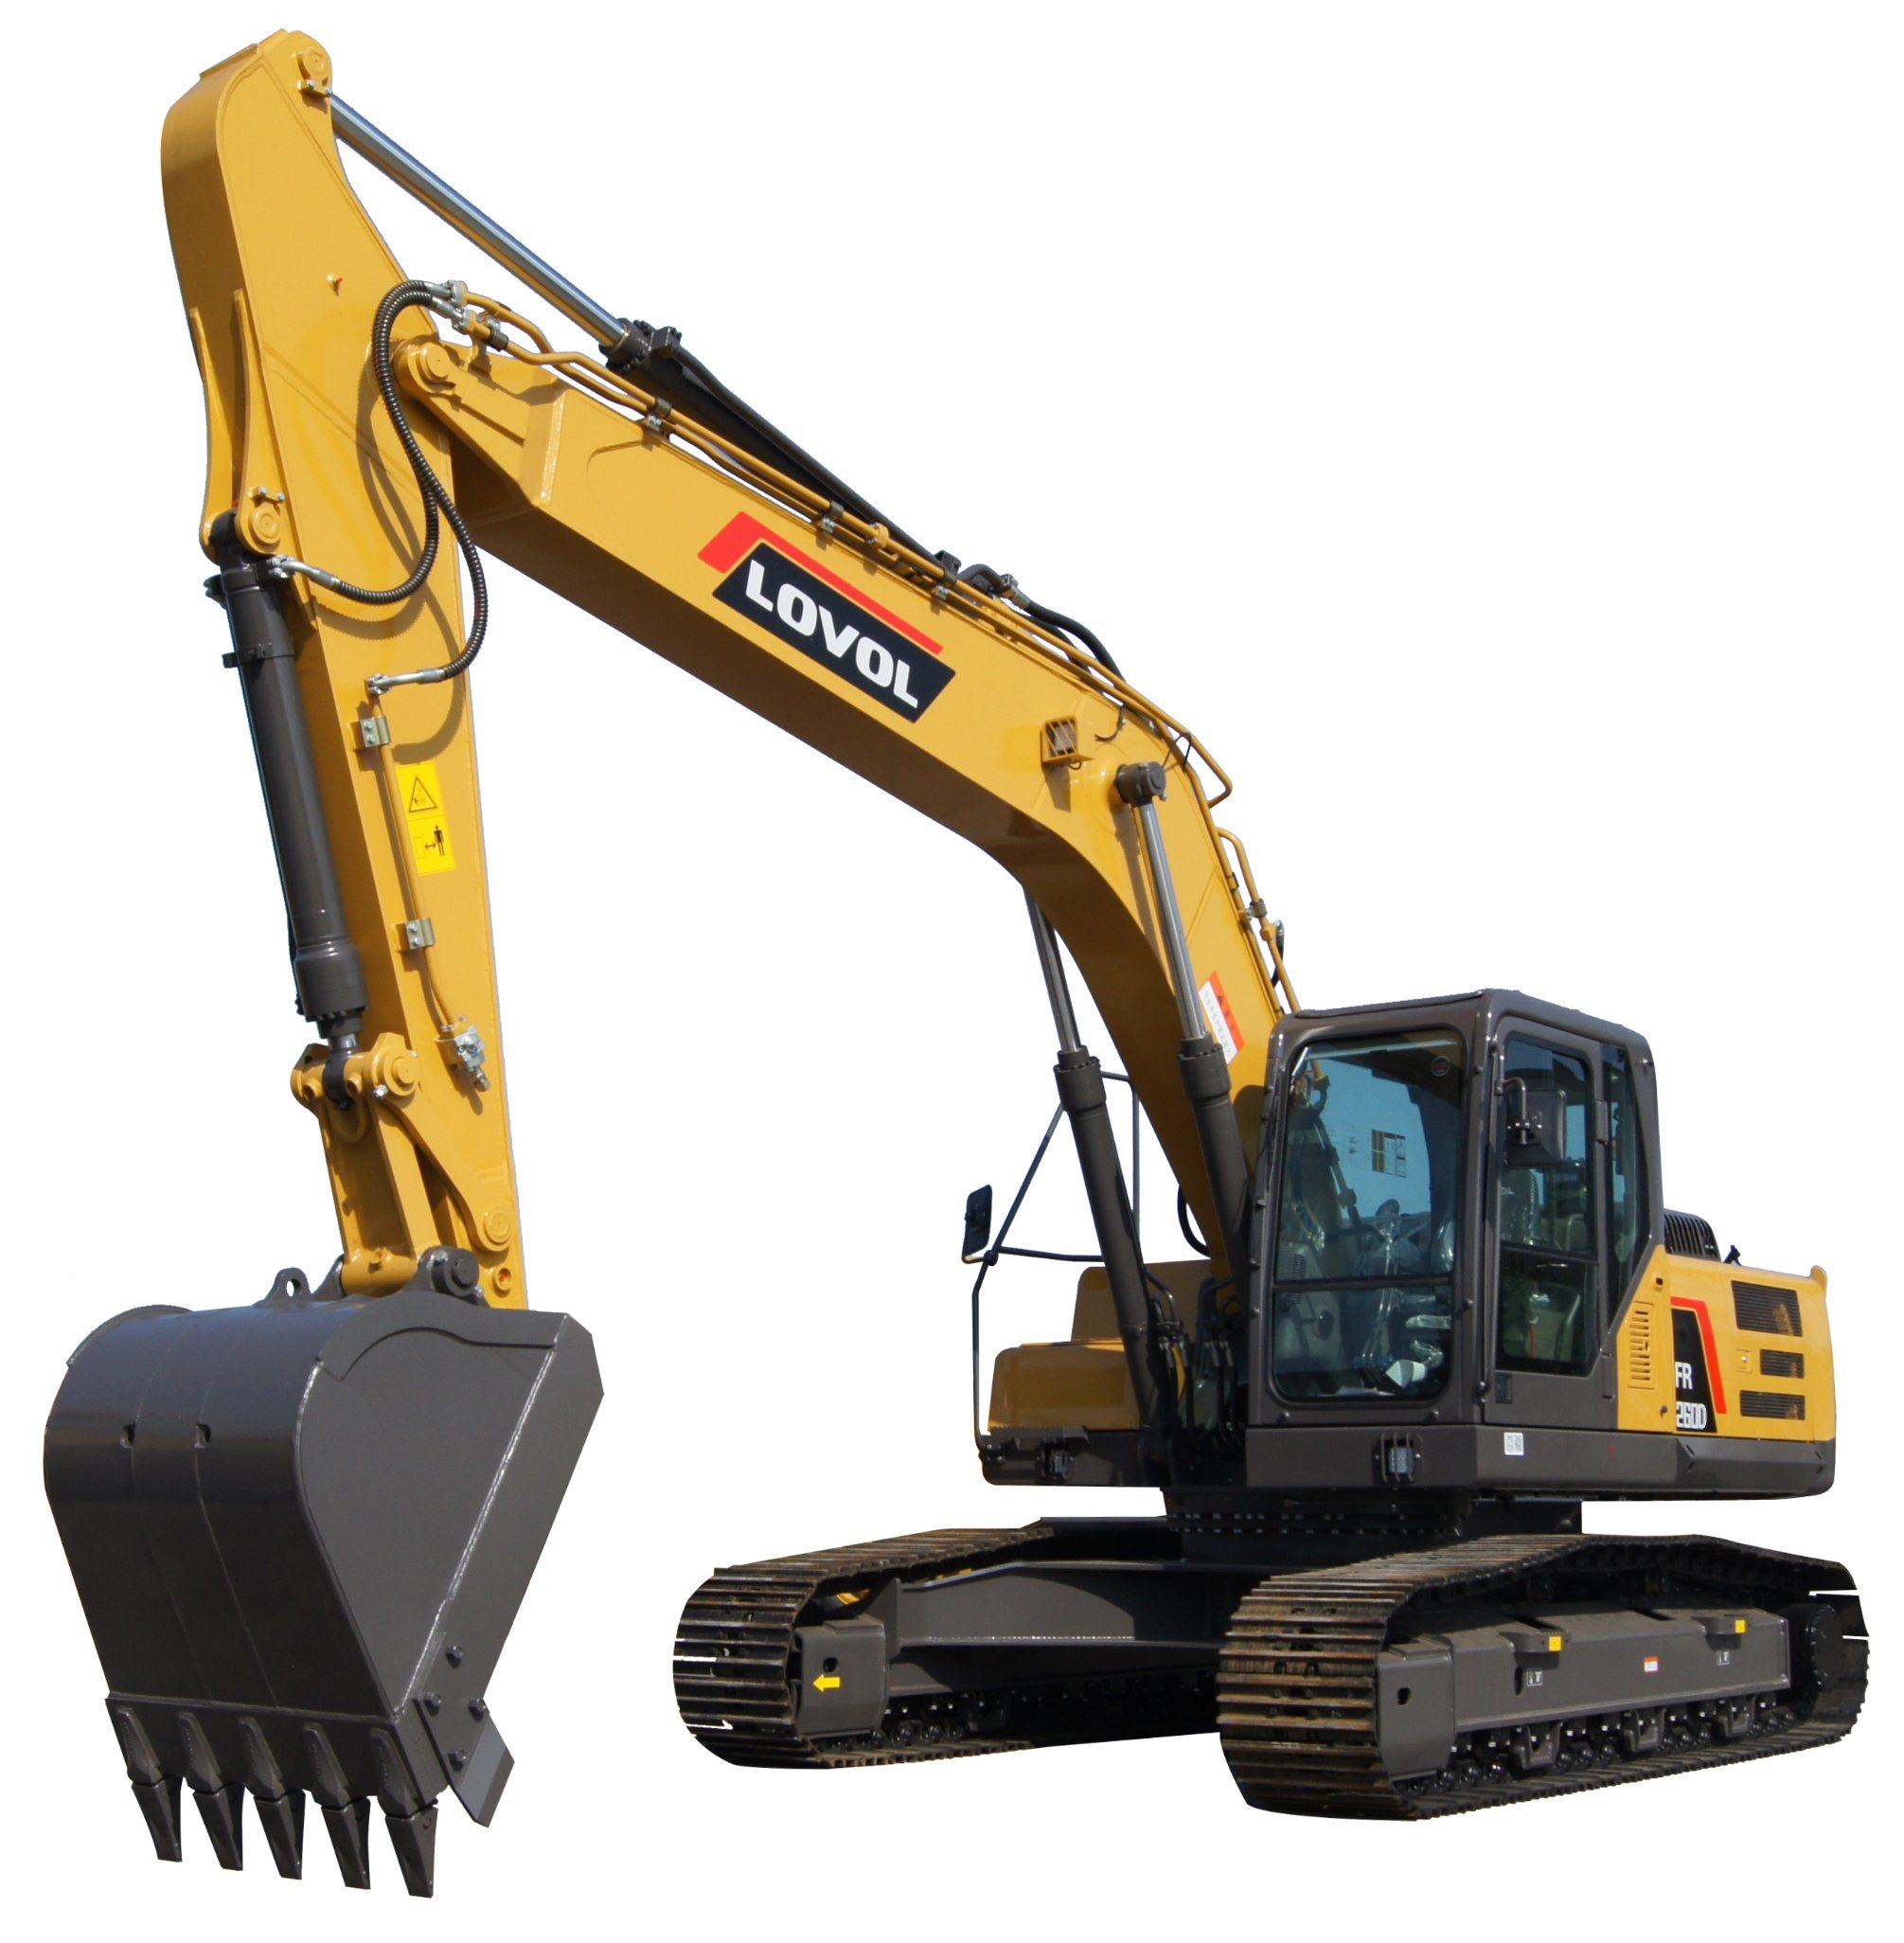 Fr260d Hot Selling Excavator 26t Digger by Lovol Brand